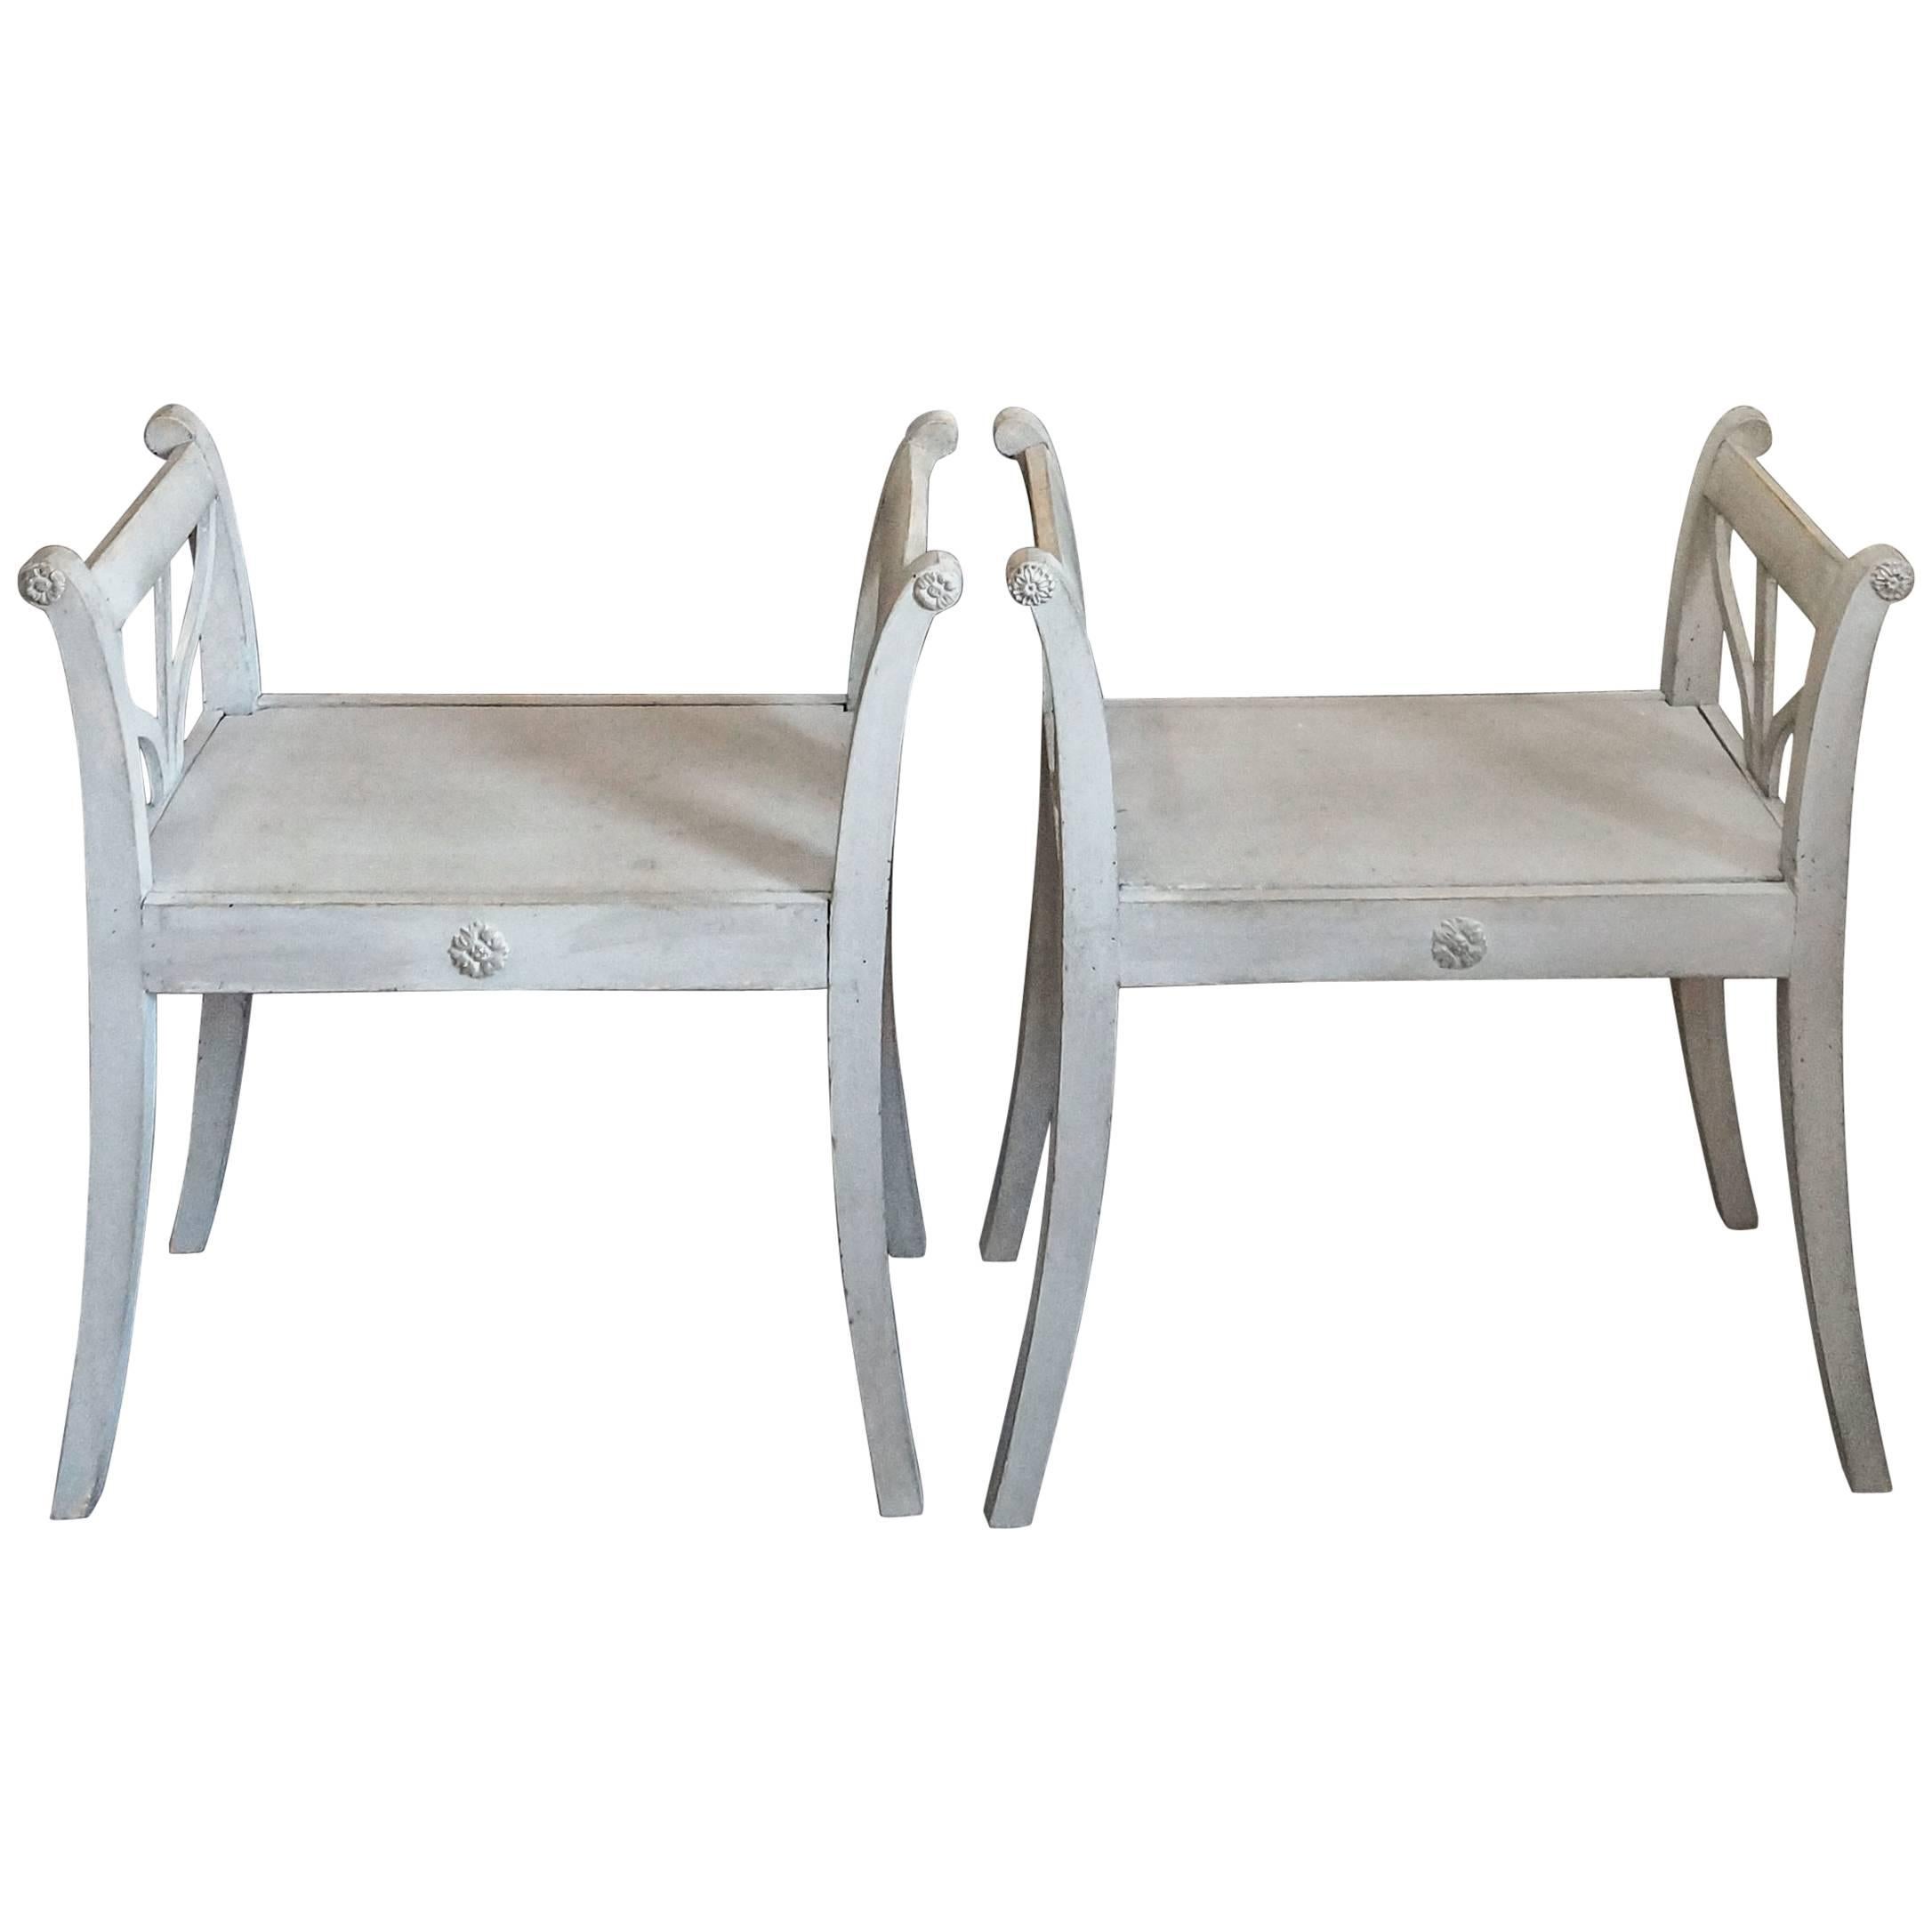 Pair of Swedish Stools with Pierced Armrests